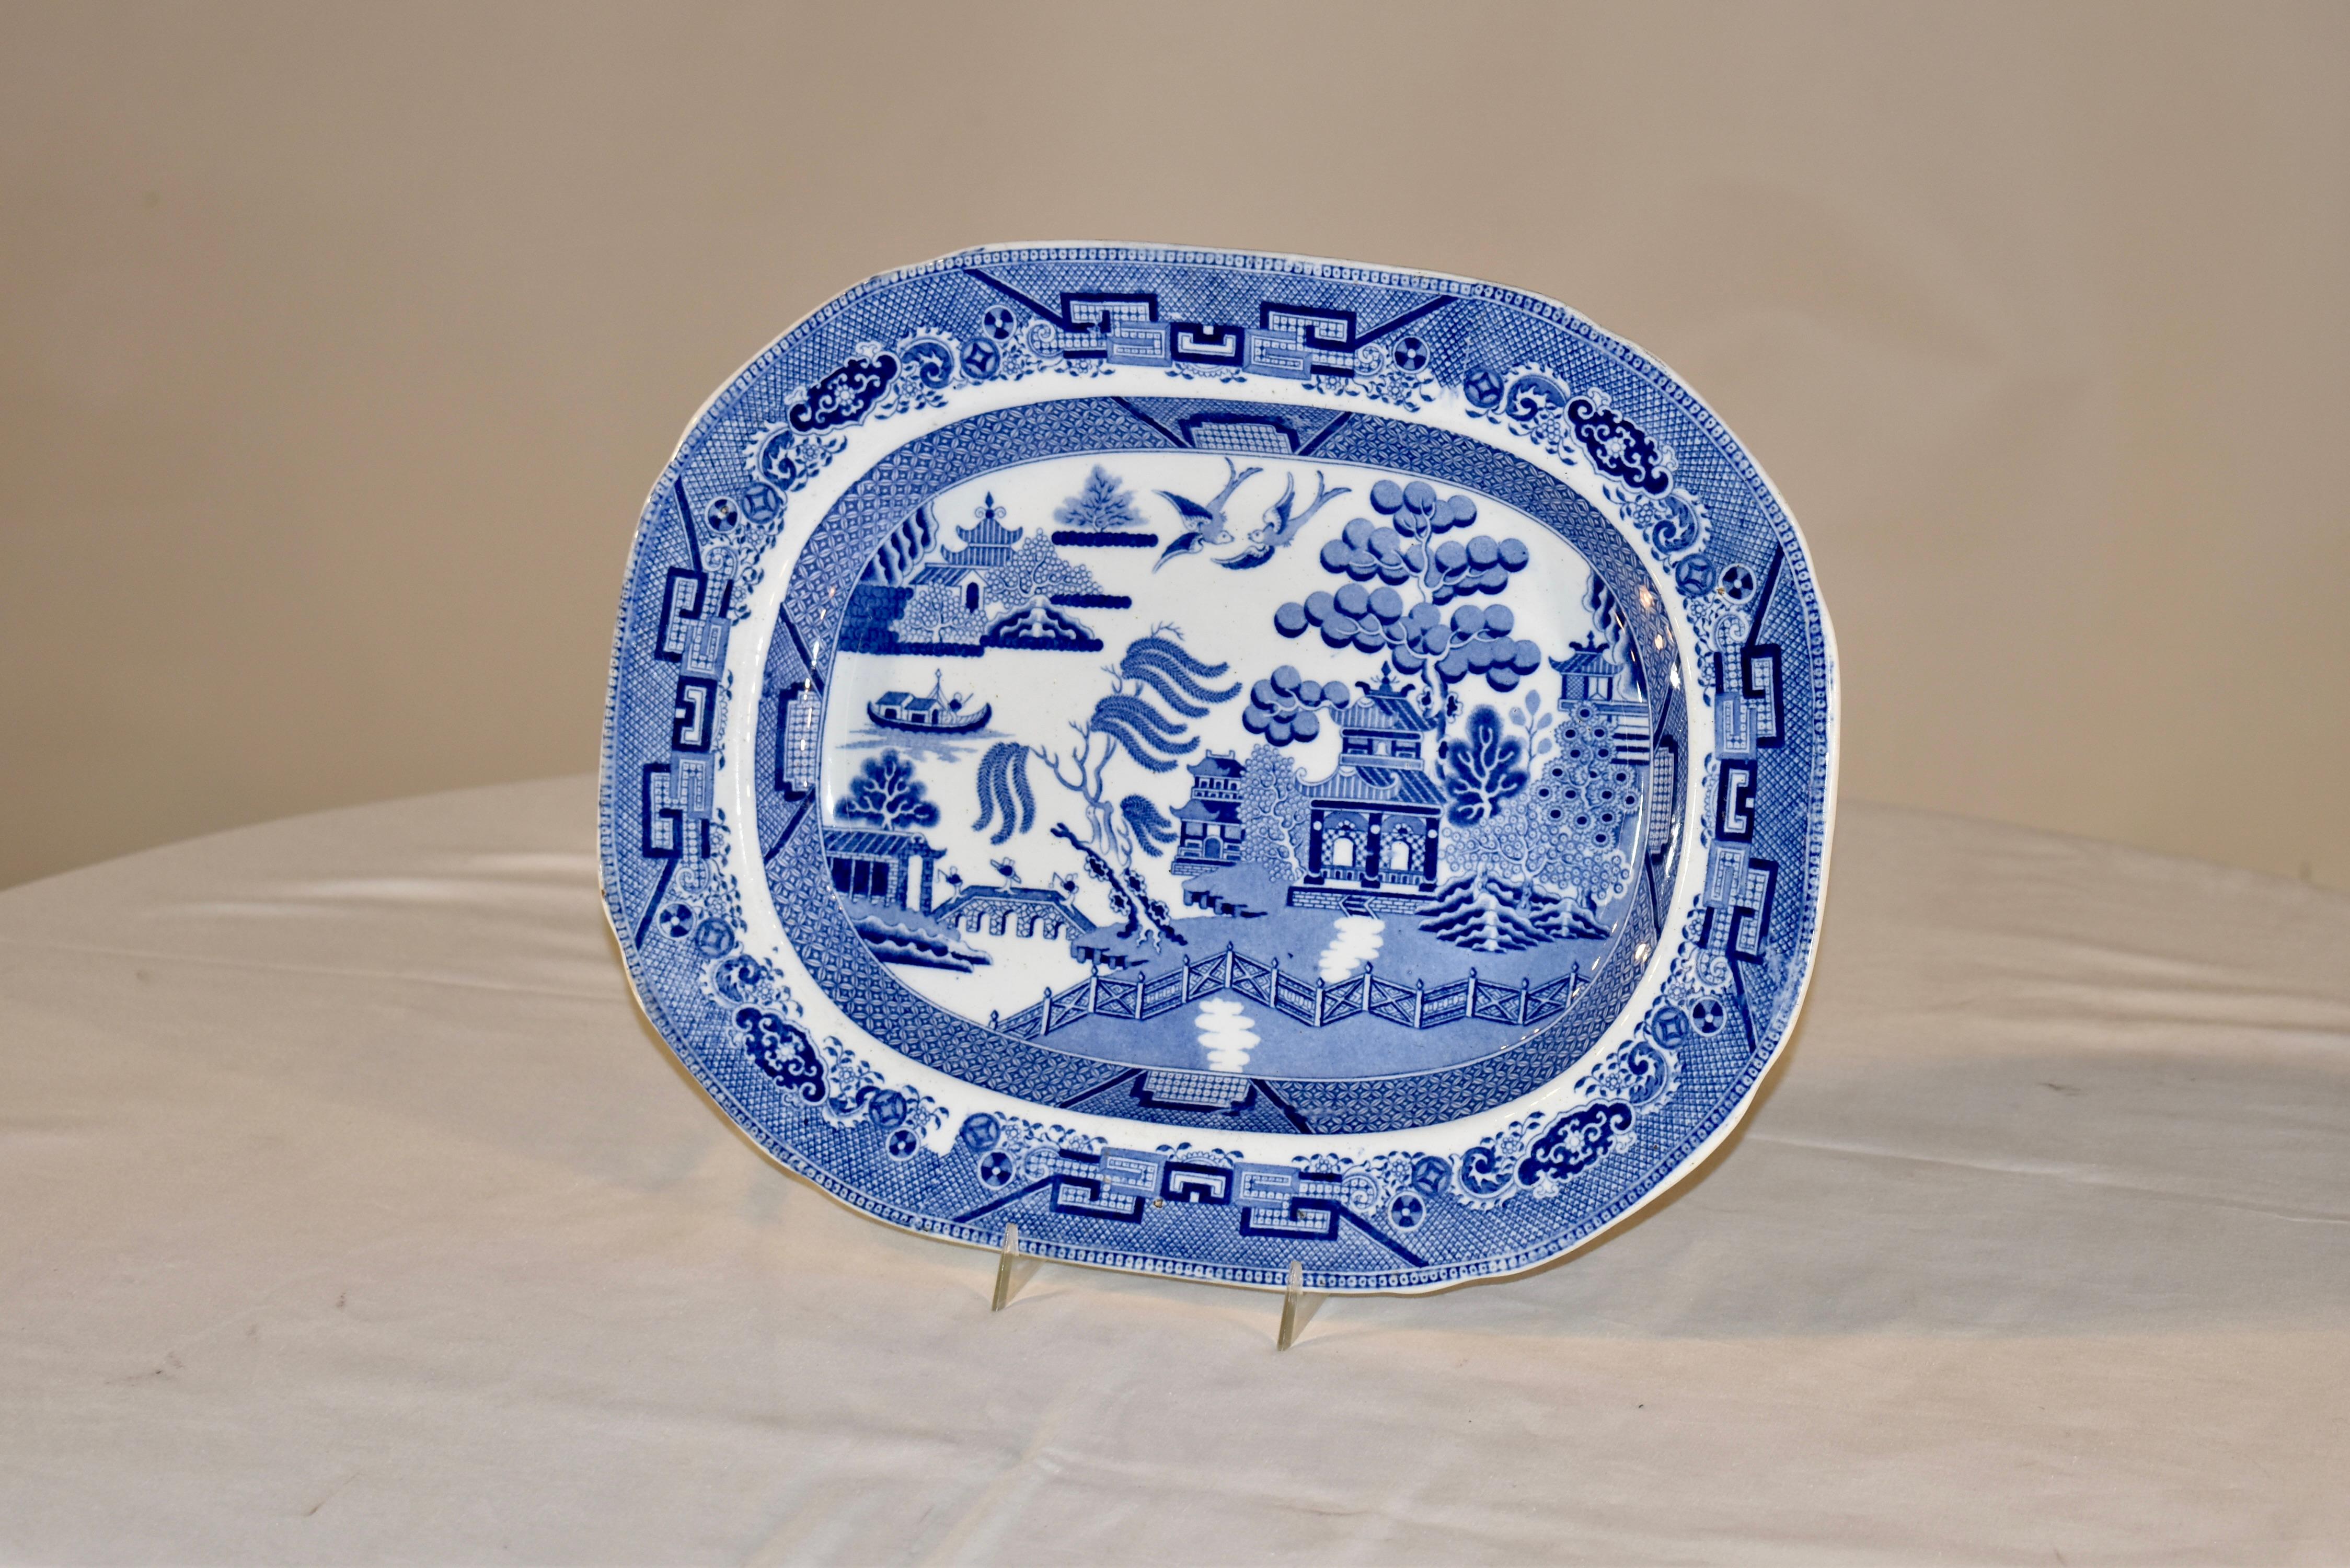 19th century English platter from the Staffordshire region. The pattern is the much collected 